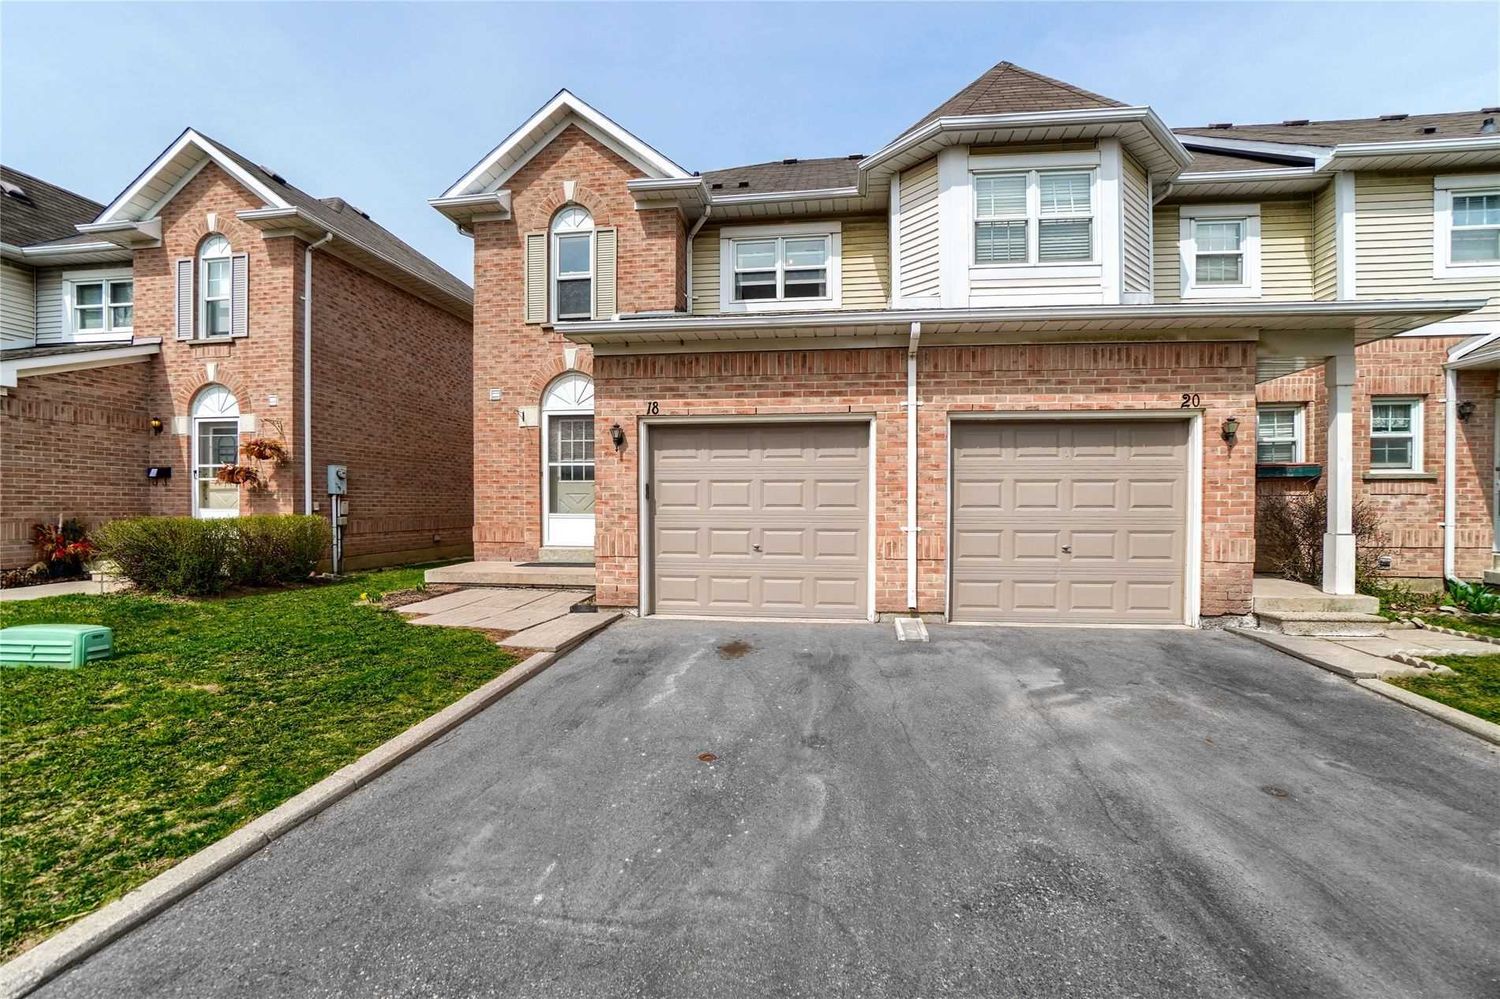 2-87 Wickstead Court. Wickstead Court Townhomes is located in  Brampton, Toronto - image #1 of 2